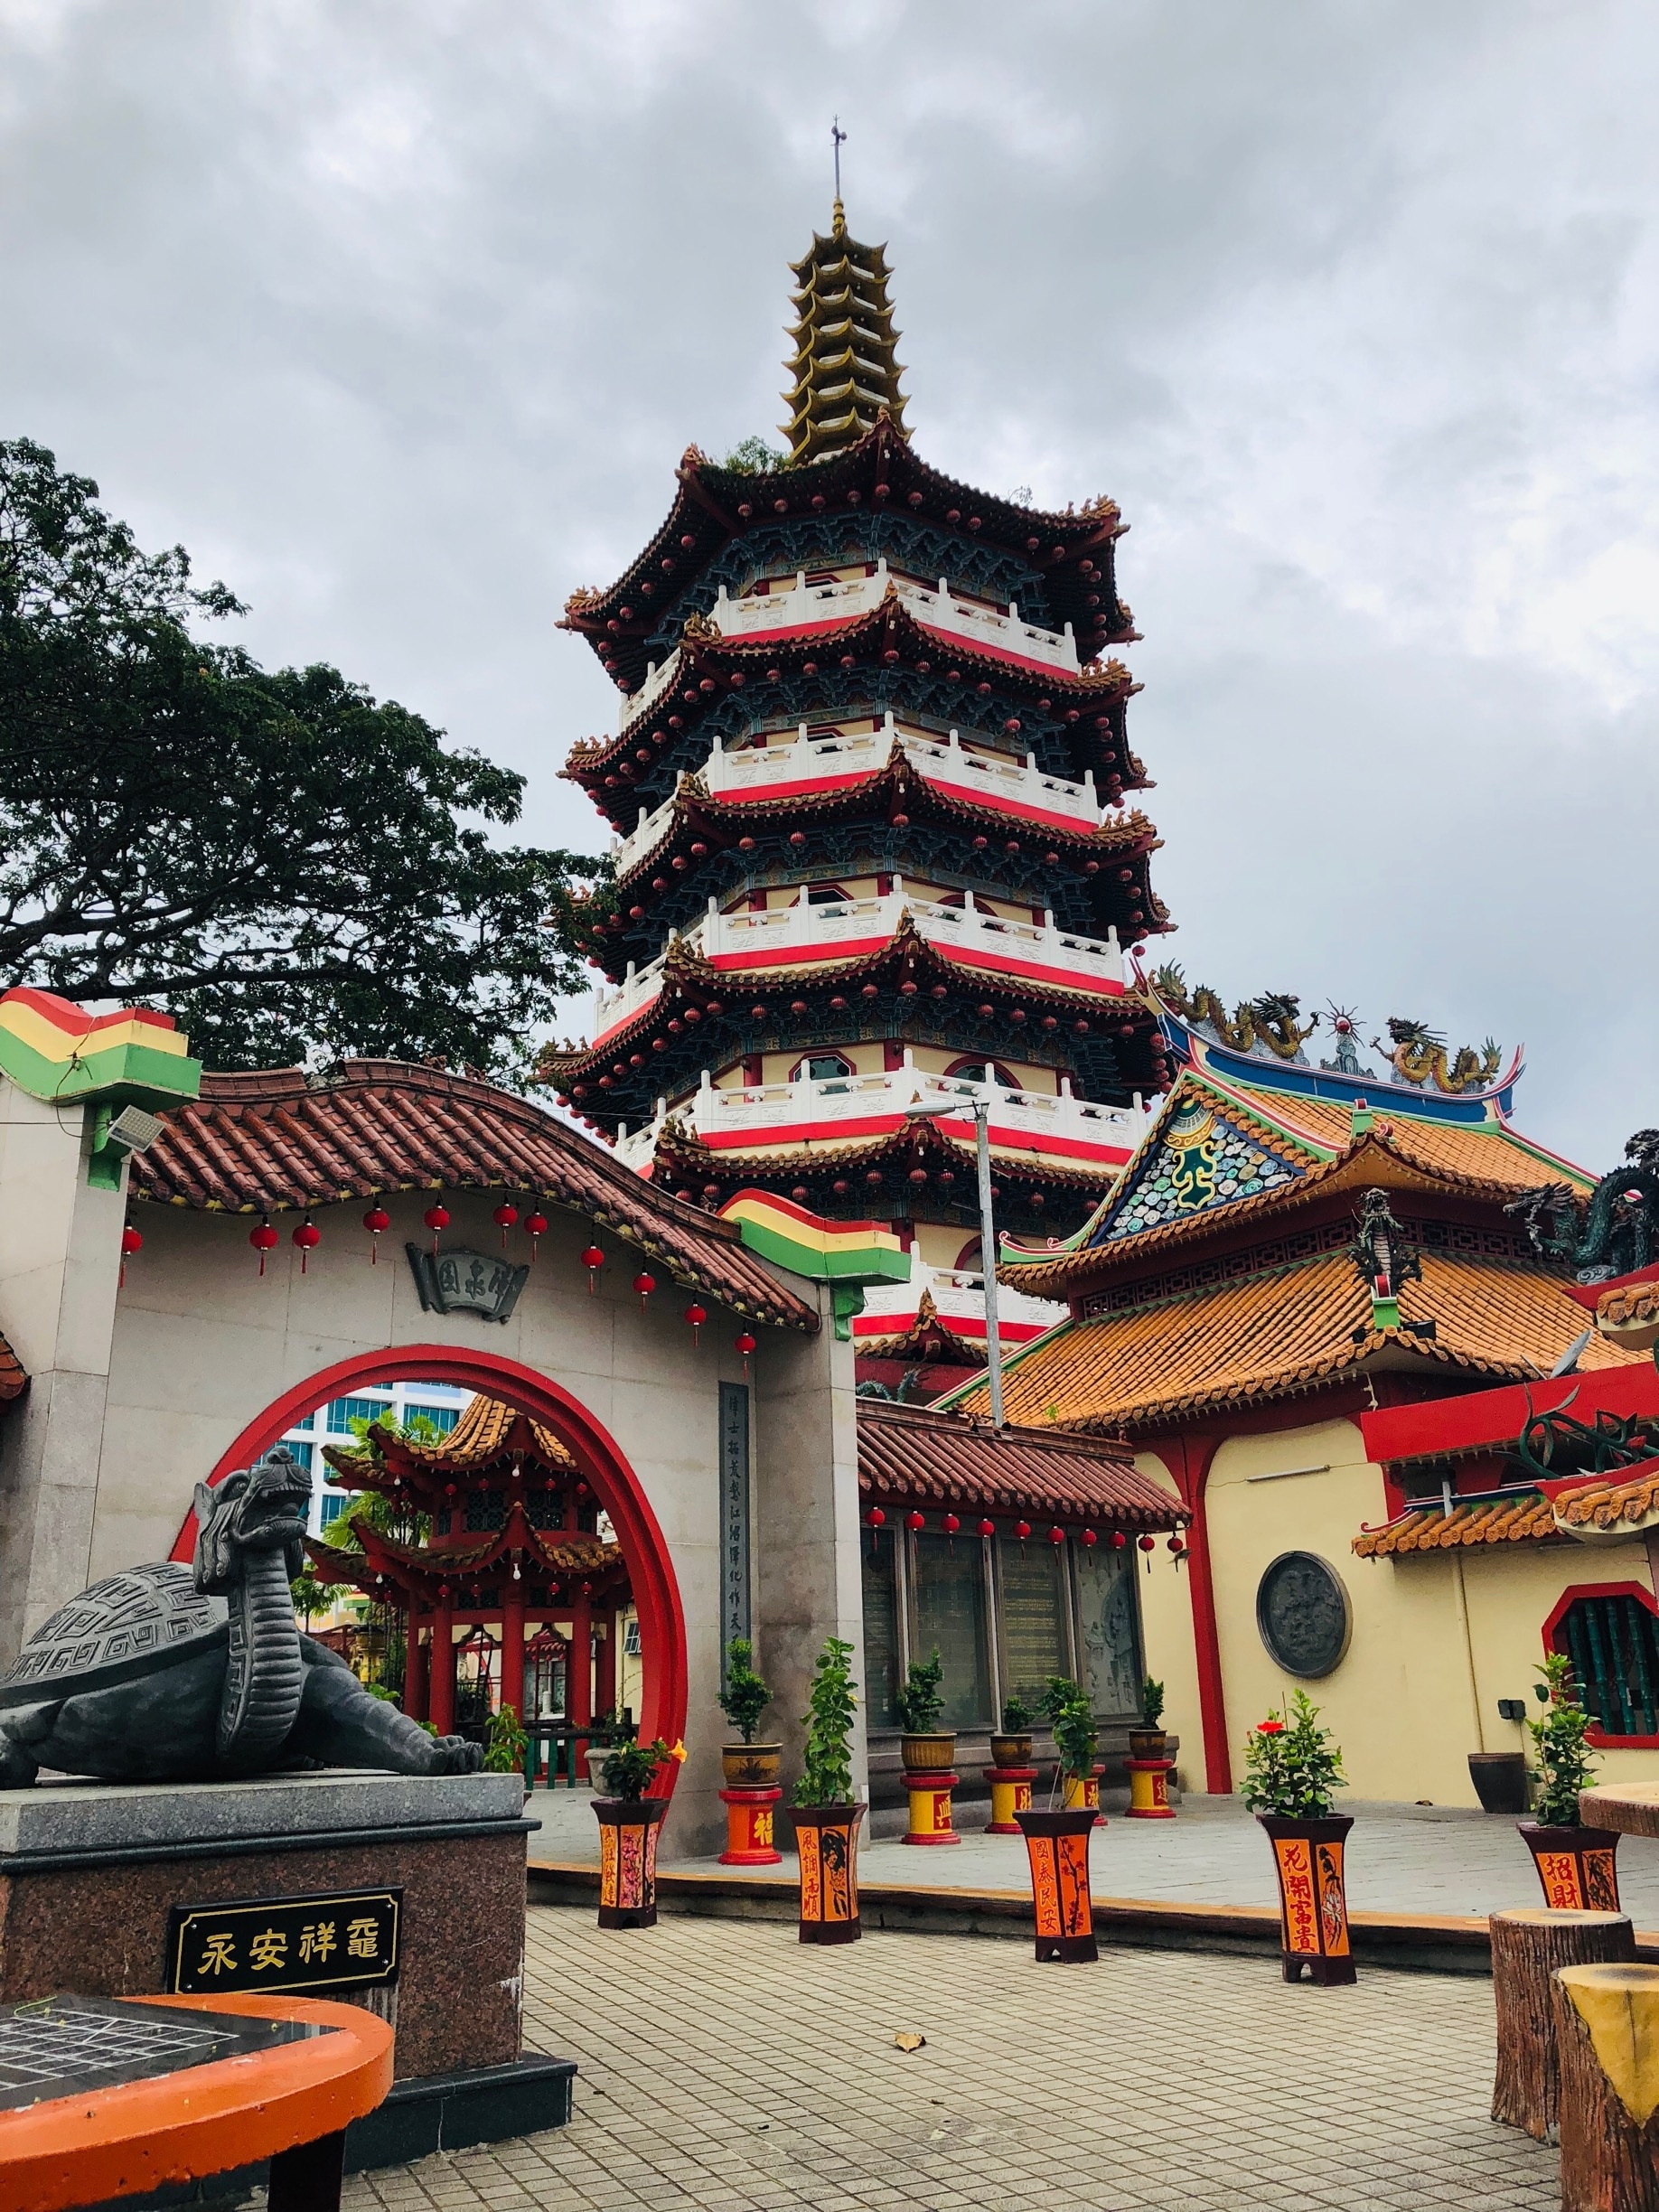 ⛩ Sibu’s iconic 7 storey pagoda, Tua Pek Kong Temple is one of the oldest and preserved Chinese temple in the town. #sibu #town #heritage #chinesetemple #hokkien #1870